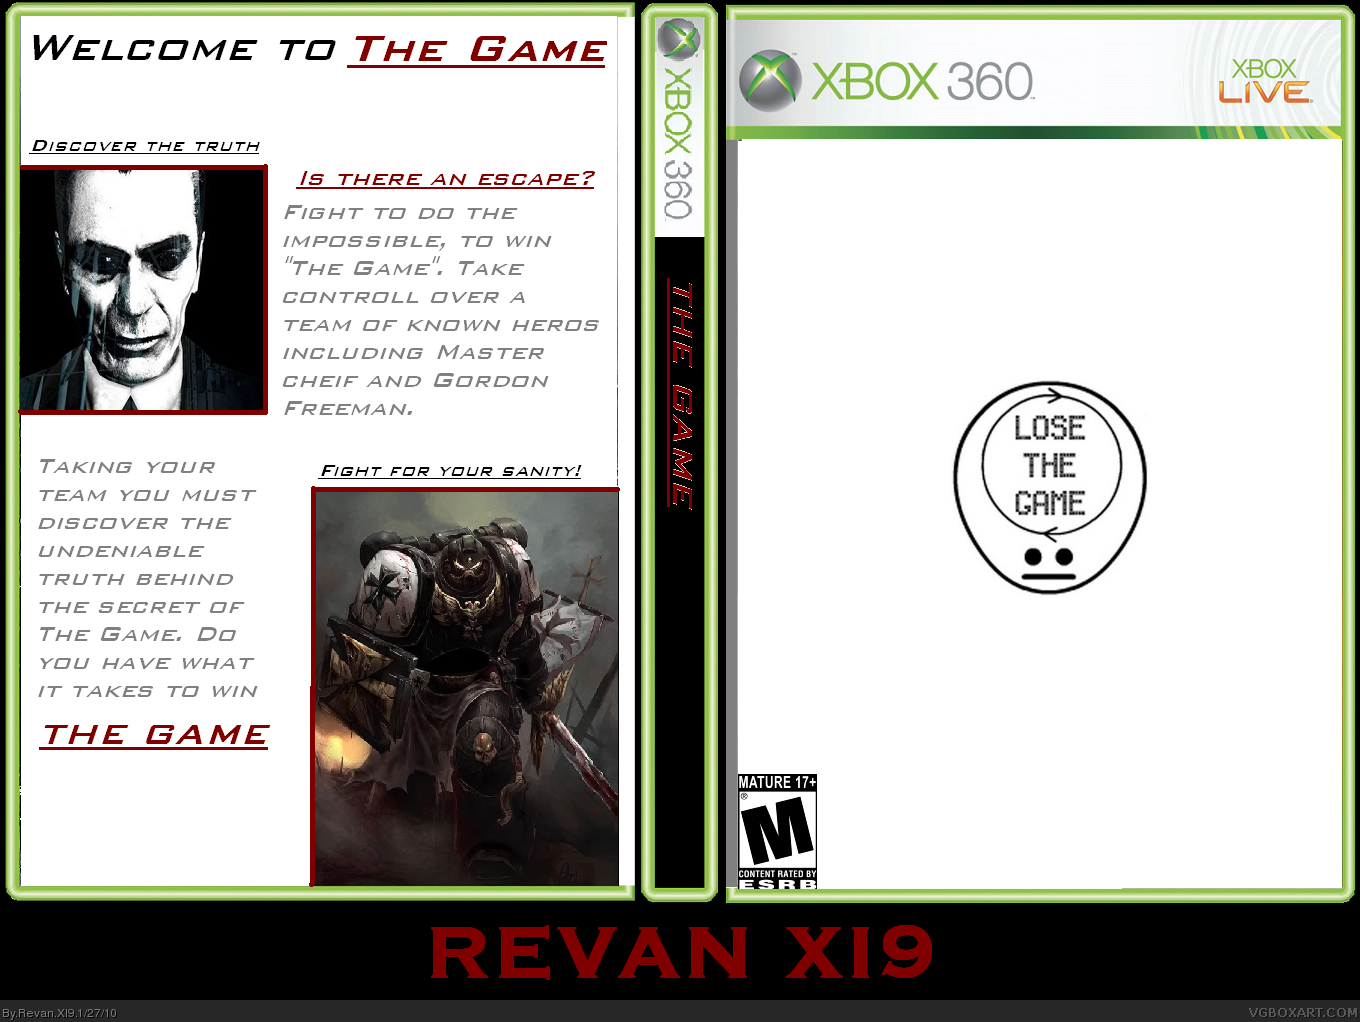 The Game box cover